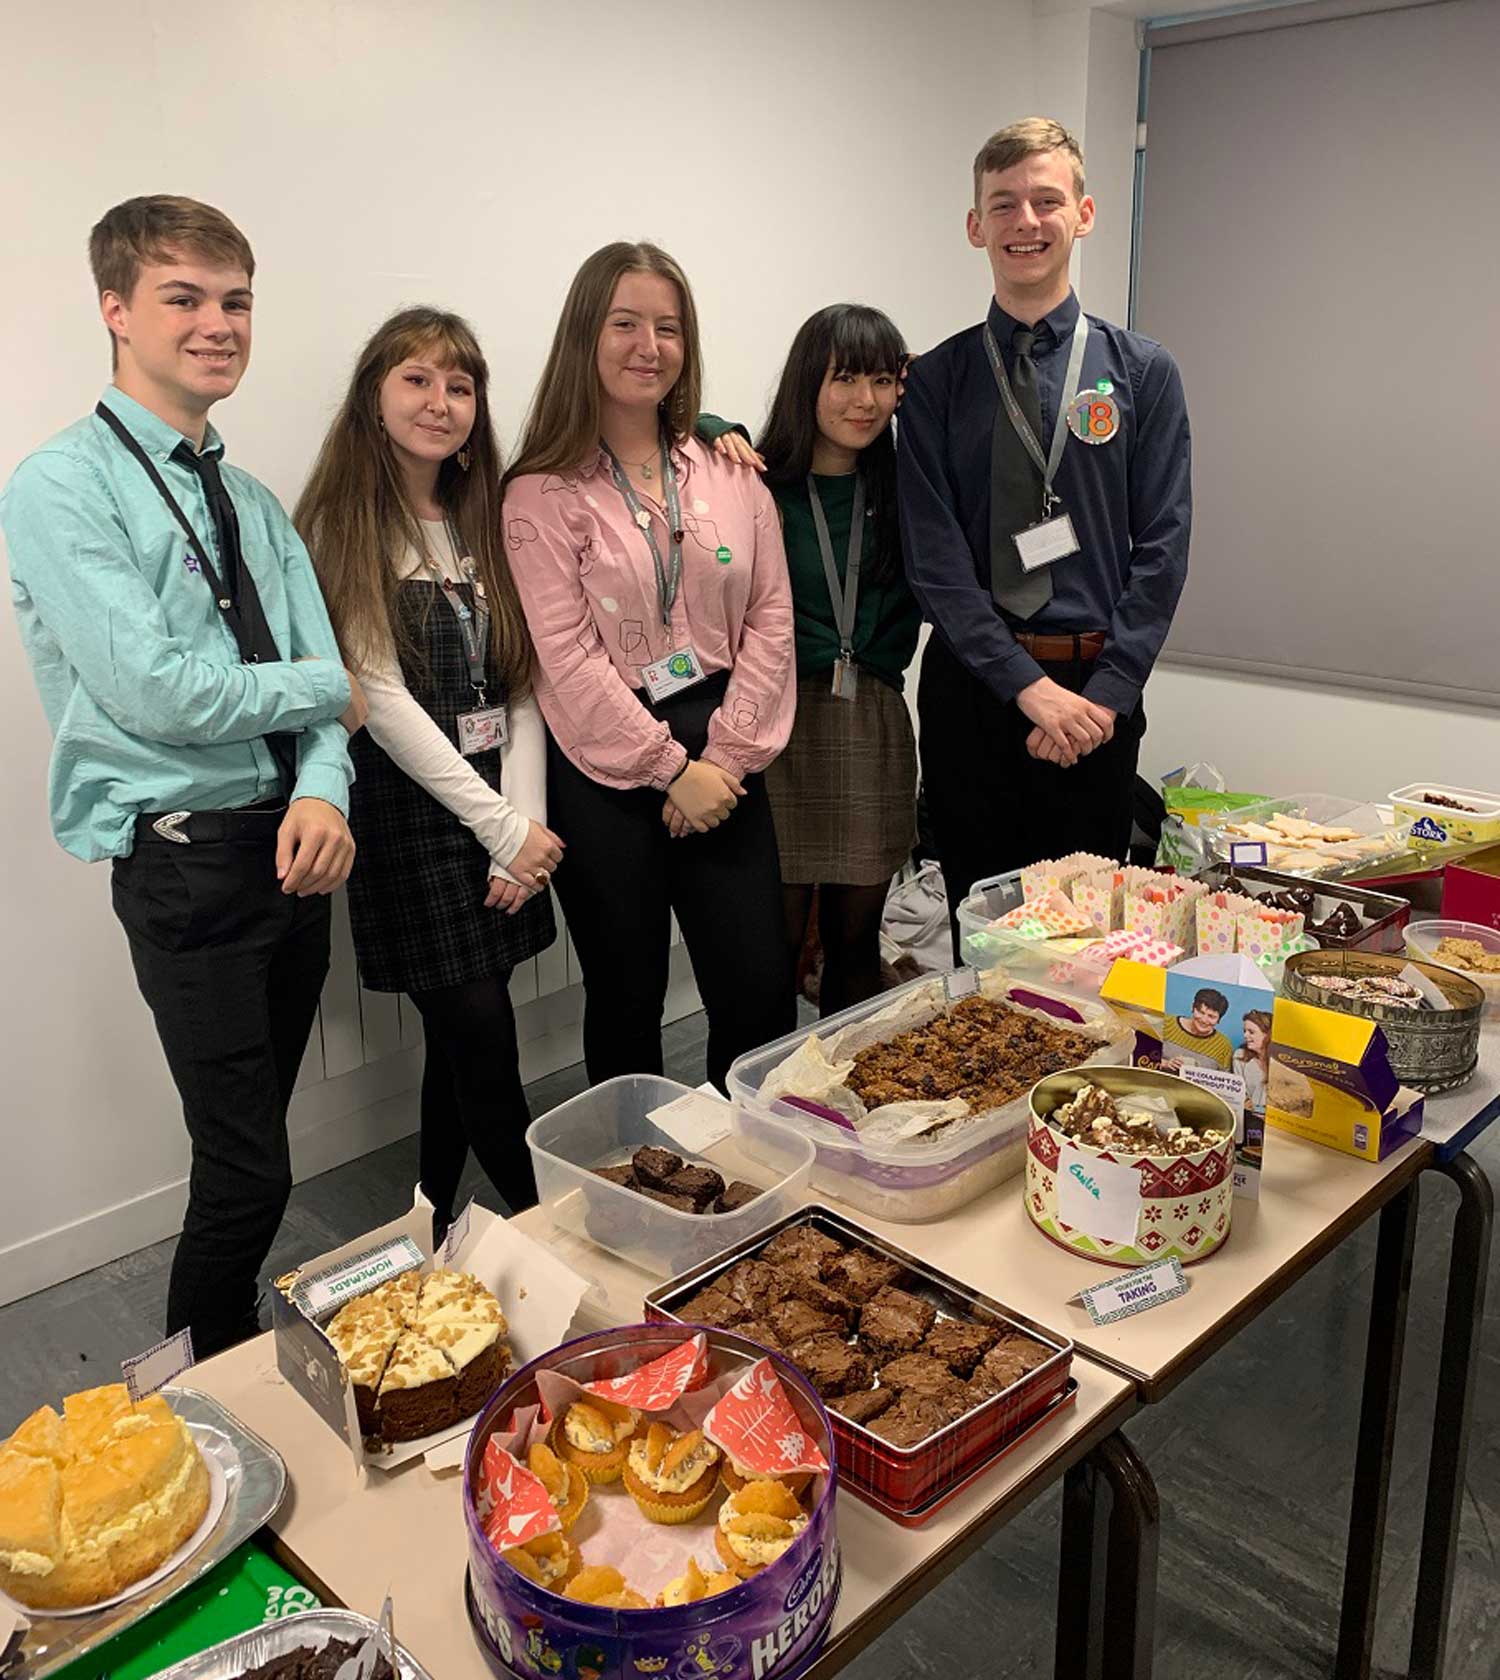 The Charity Prefects with some of the goodies at the Rossett School Bake Sale, from left: Oscar Reynolds, Aysha Chakir, Emilia Clipston, Miki Burt and Jack Moran